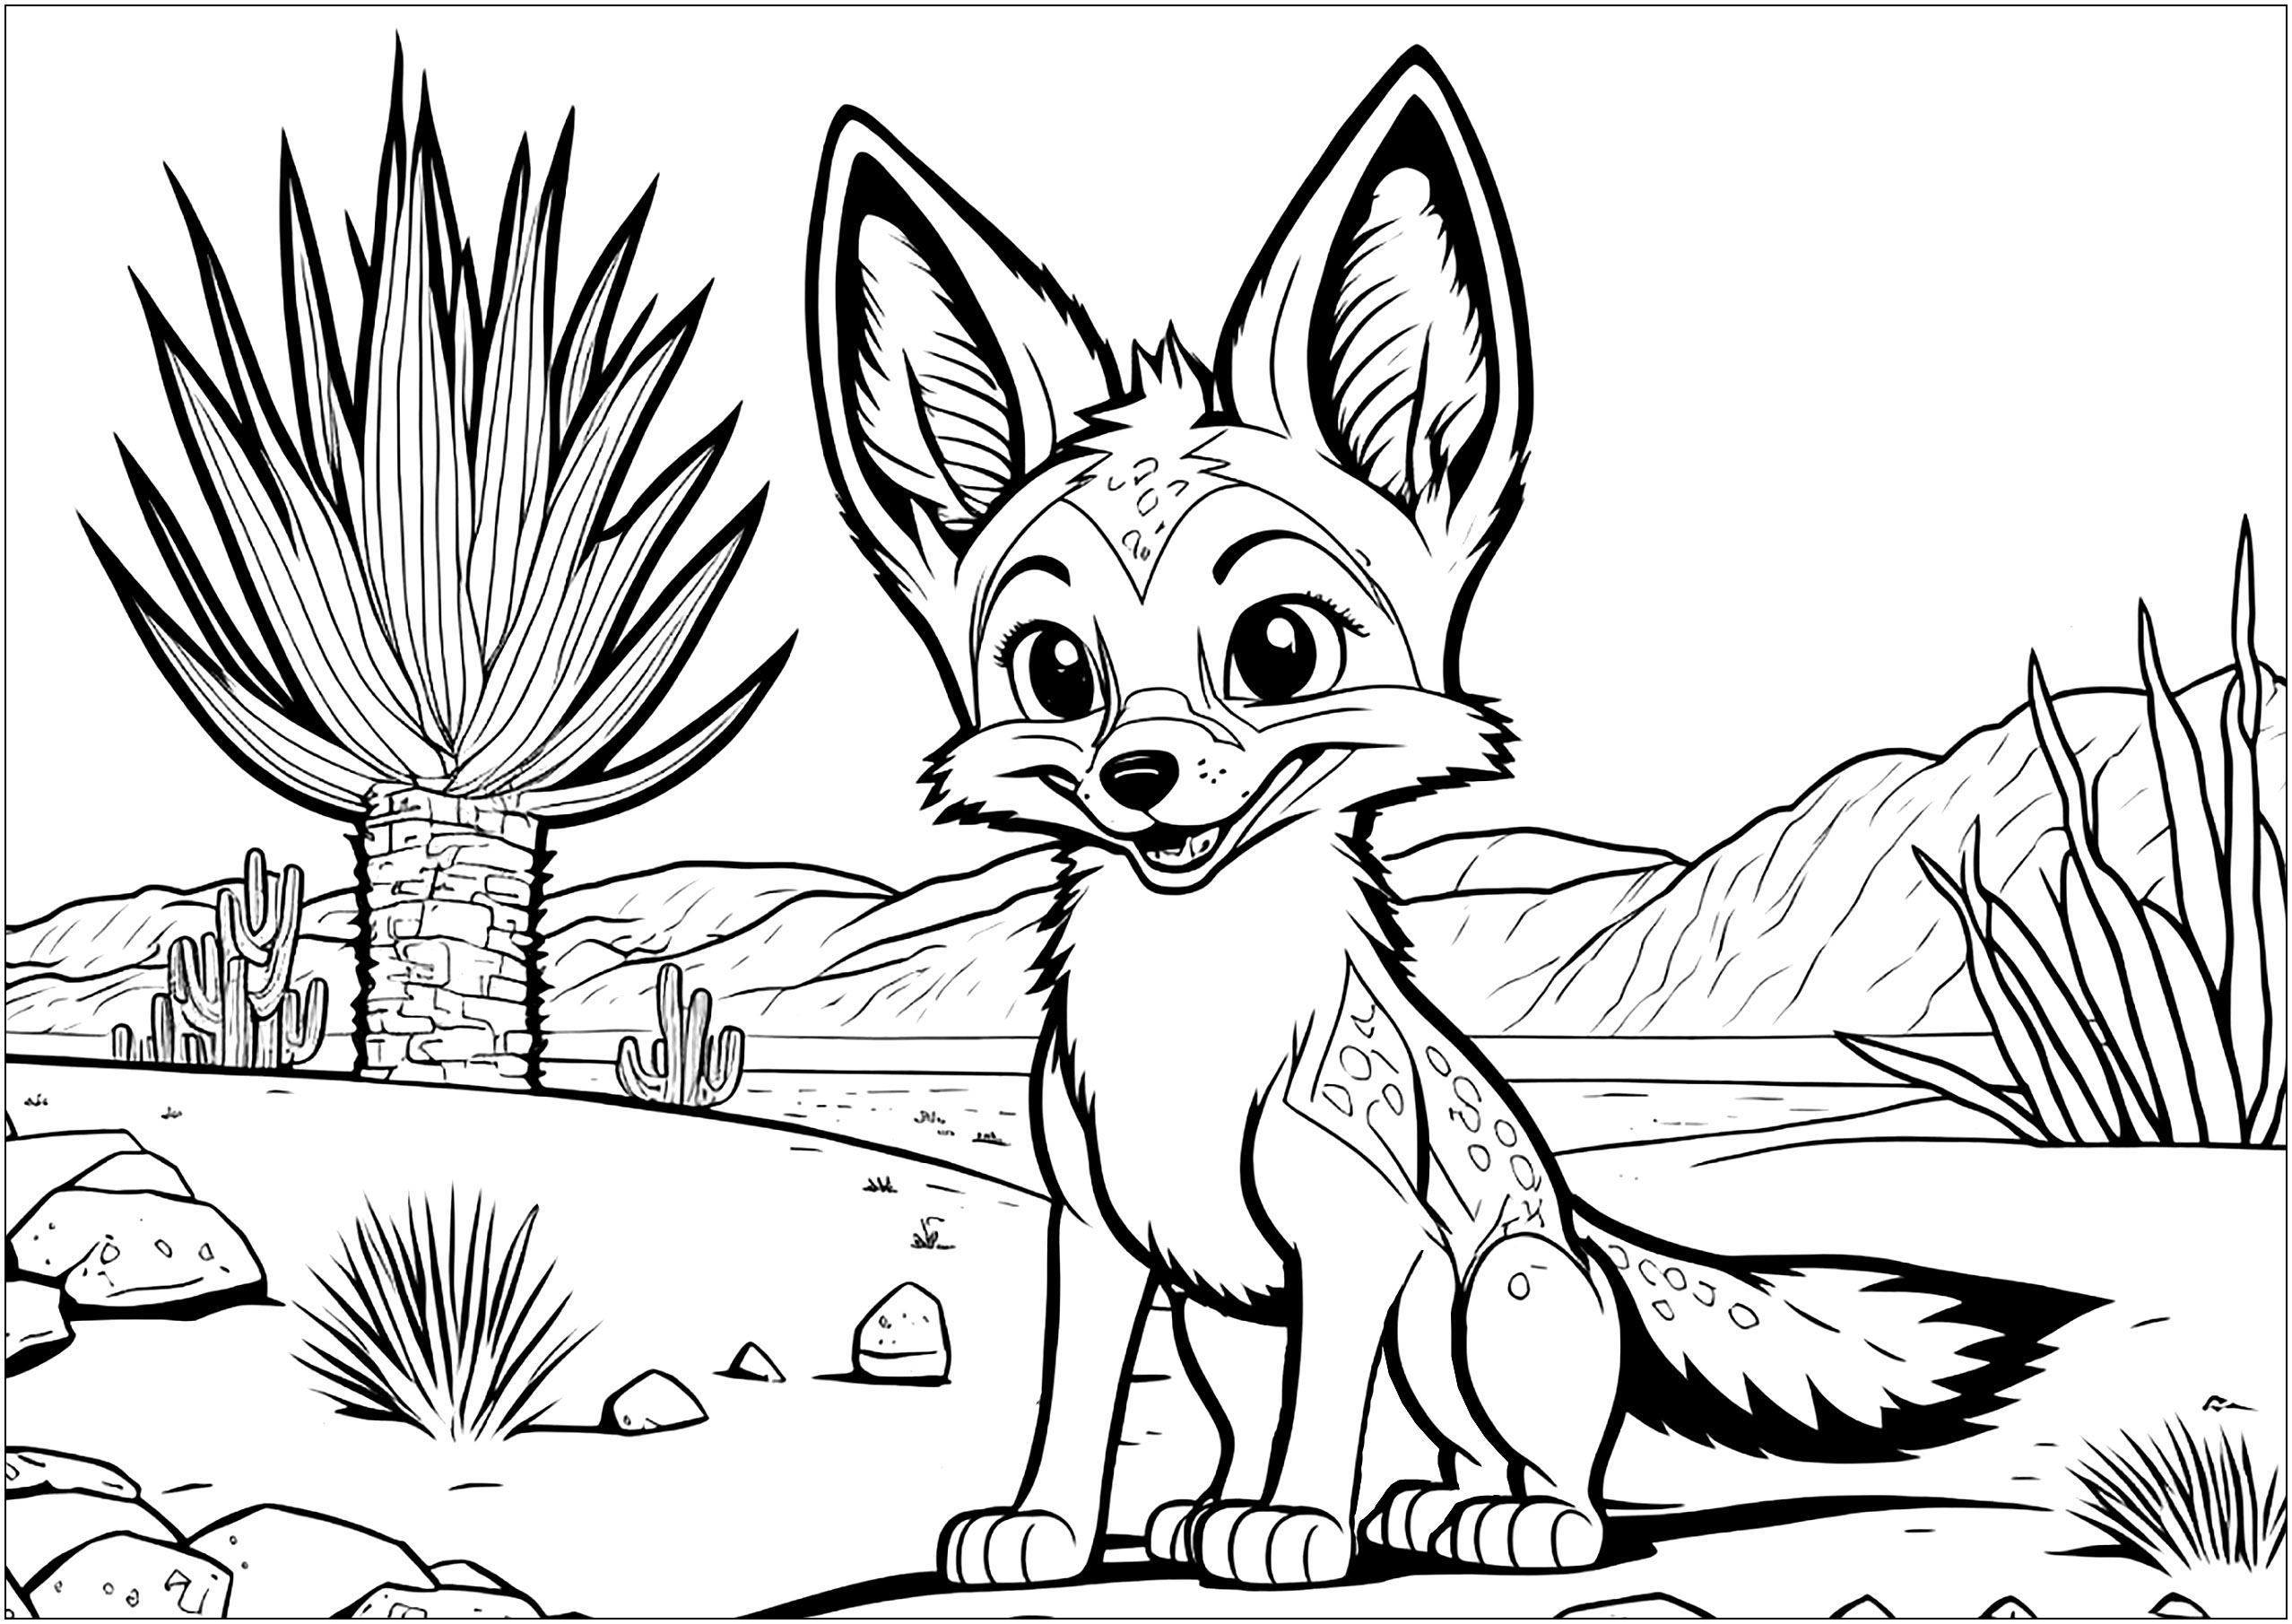 Color this fox with your best colors, make it shine in the desert!. Whichever color kids choose, the fox will be glowing in this desert. Children can also add details to this coloring page.